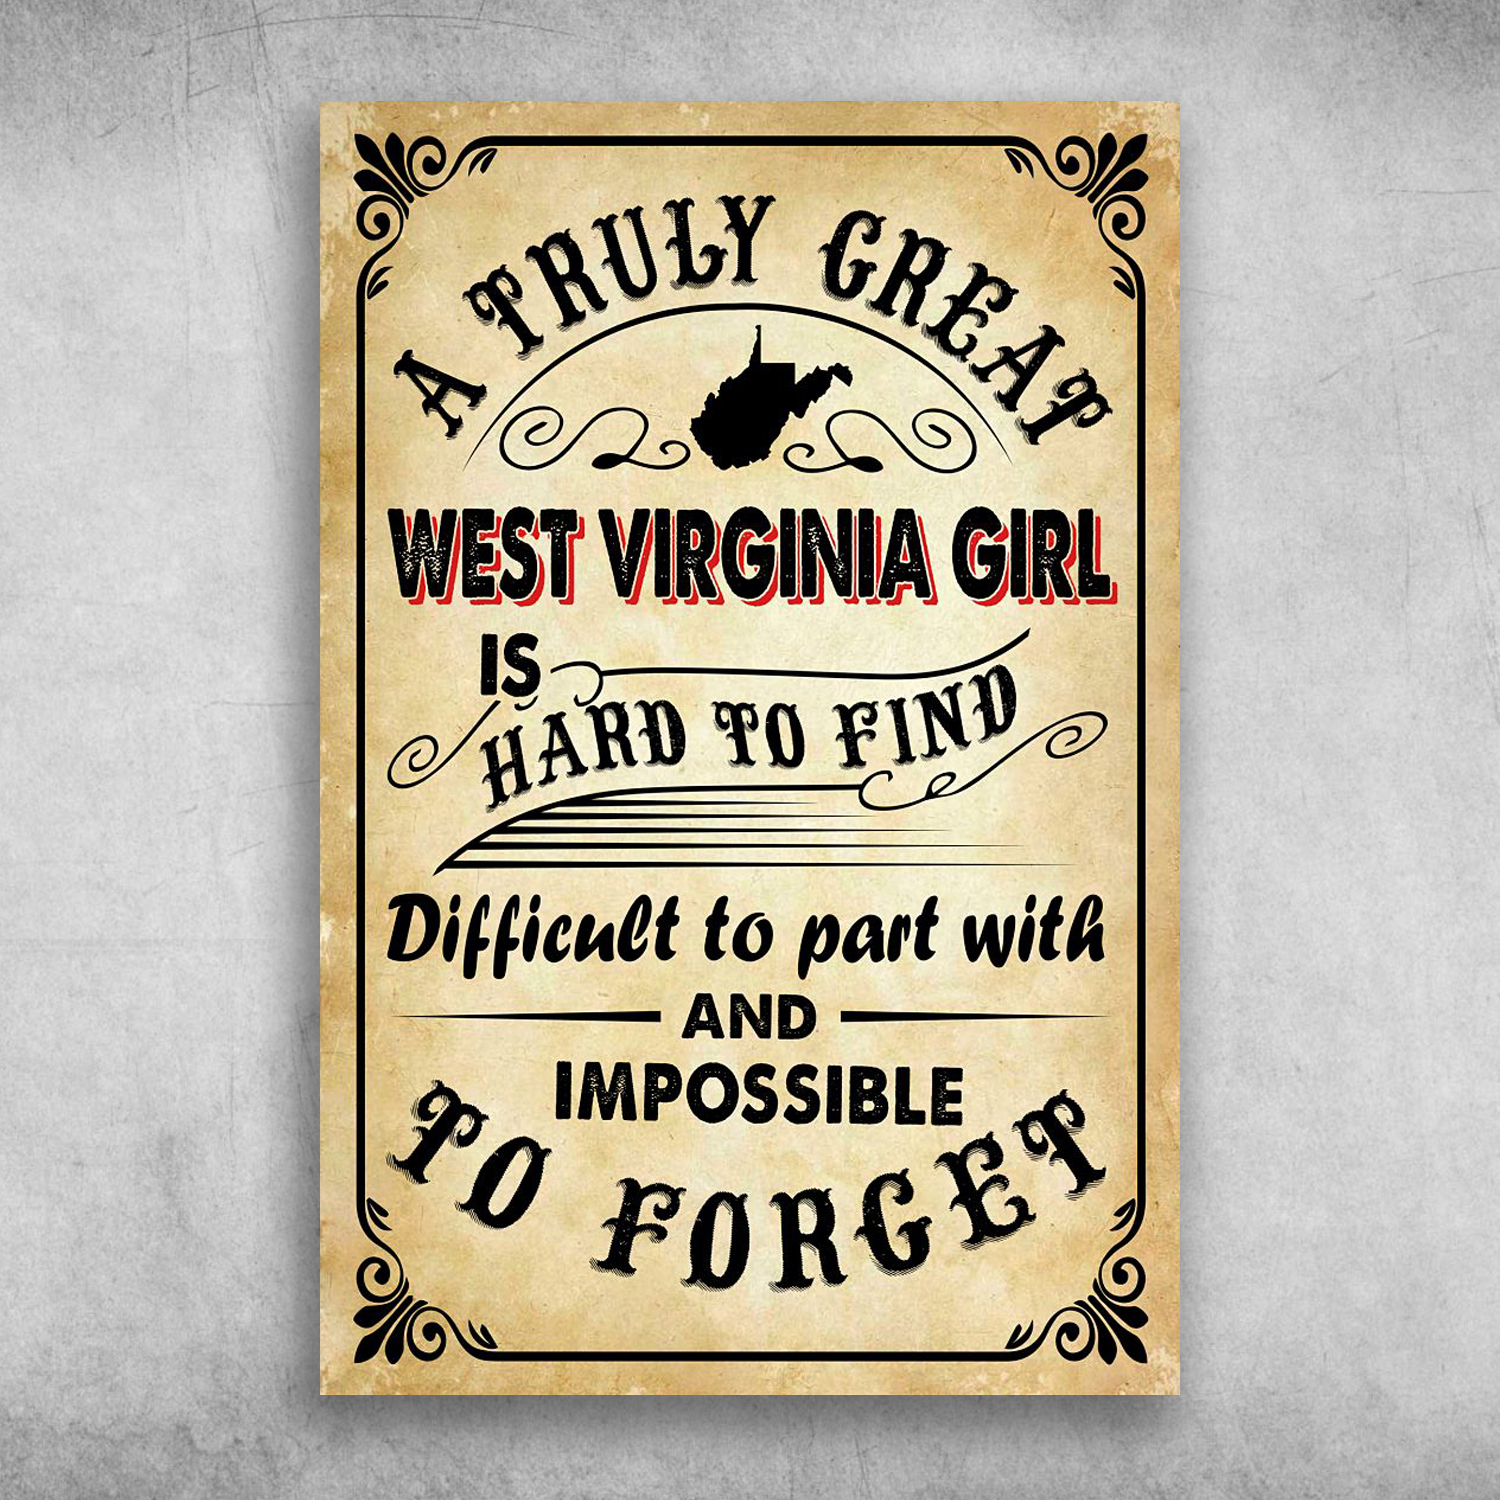 A Truly Great West Virginia Girl Is Hard To Find